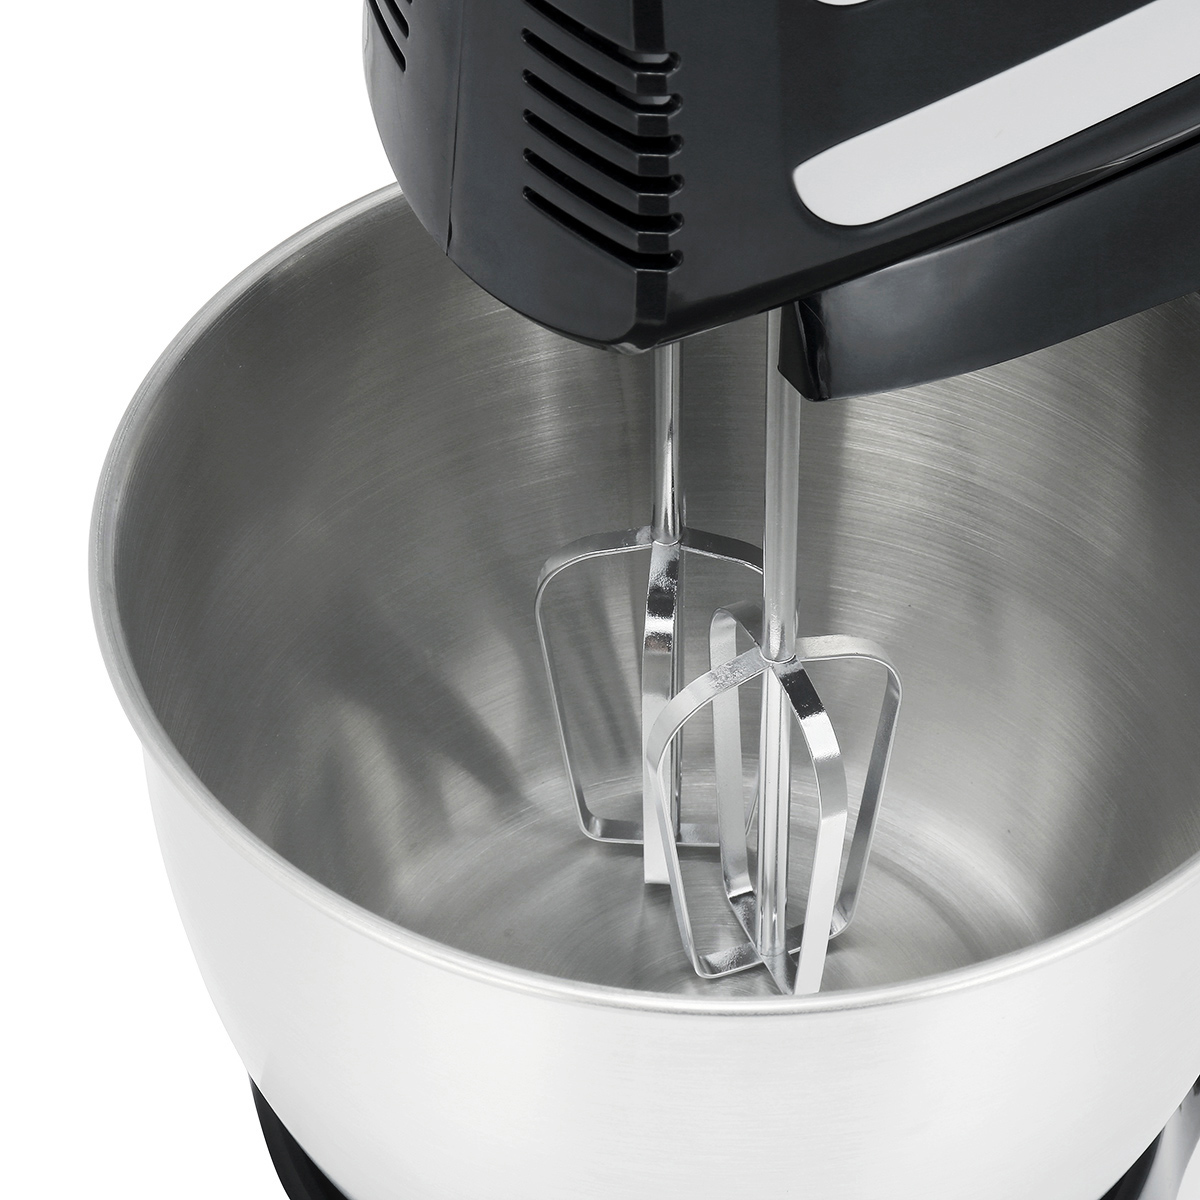 SOKANY-Stainless-Steel-Electric-Cake-Mixer-5-speed-Adjustment-Compact-Portable-Food-Beater-1916486-9